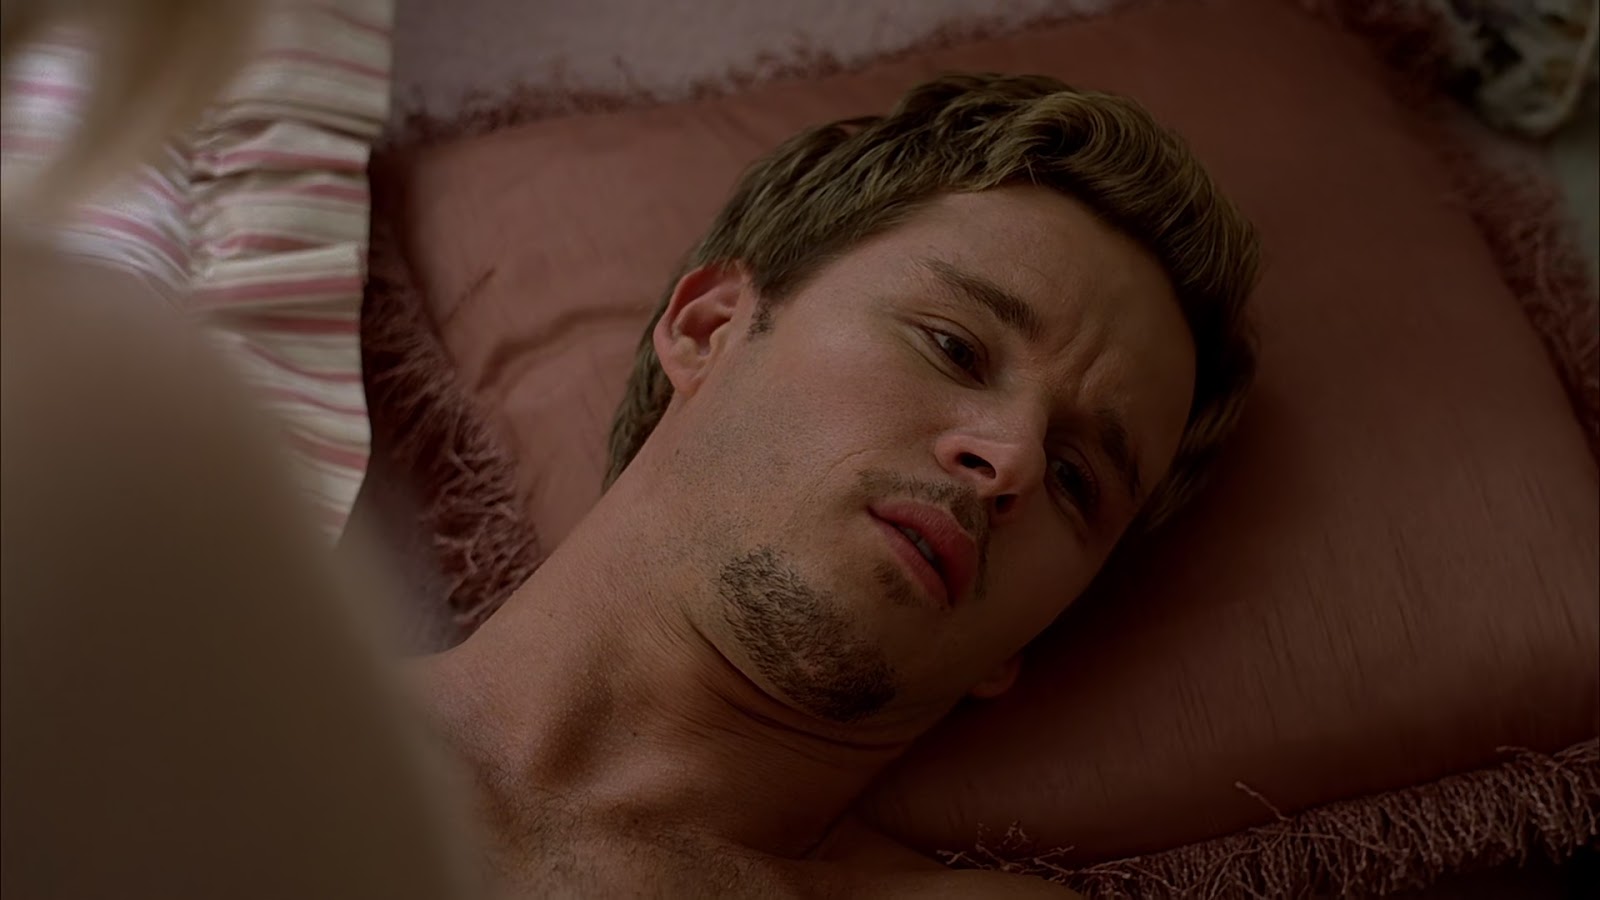 Ryan Kwanten shirtless in True Blood 5-03 "Whatever I Am, You Made Me&...